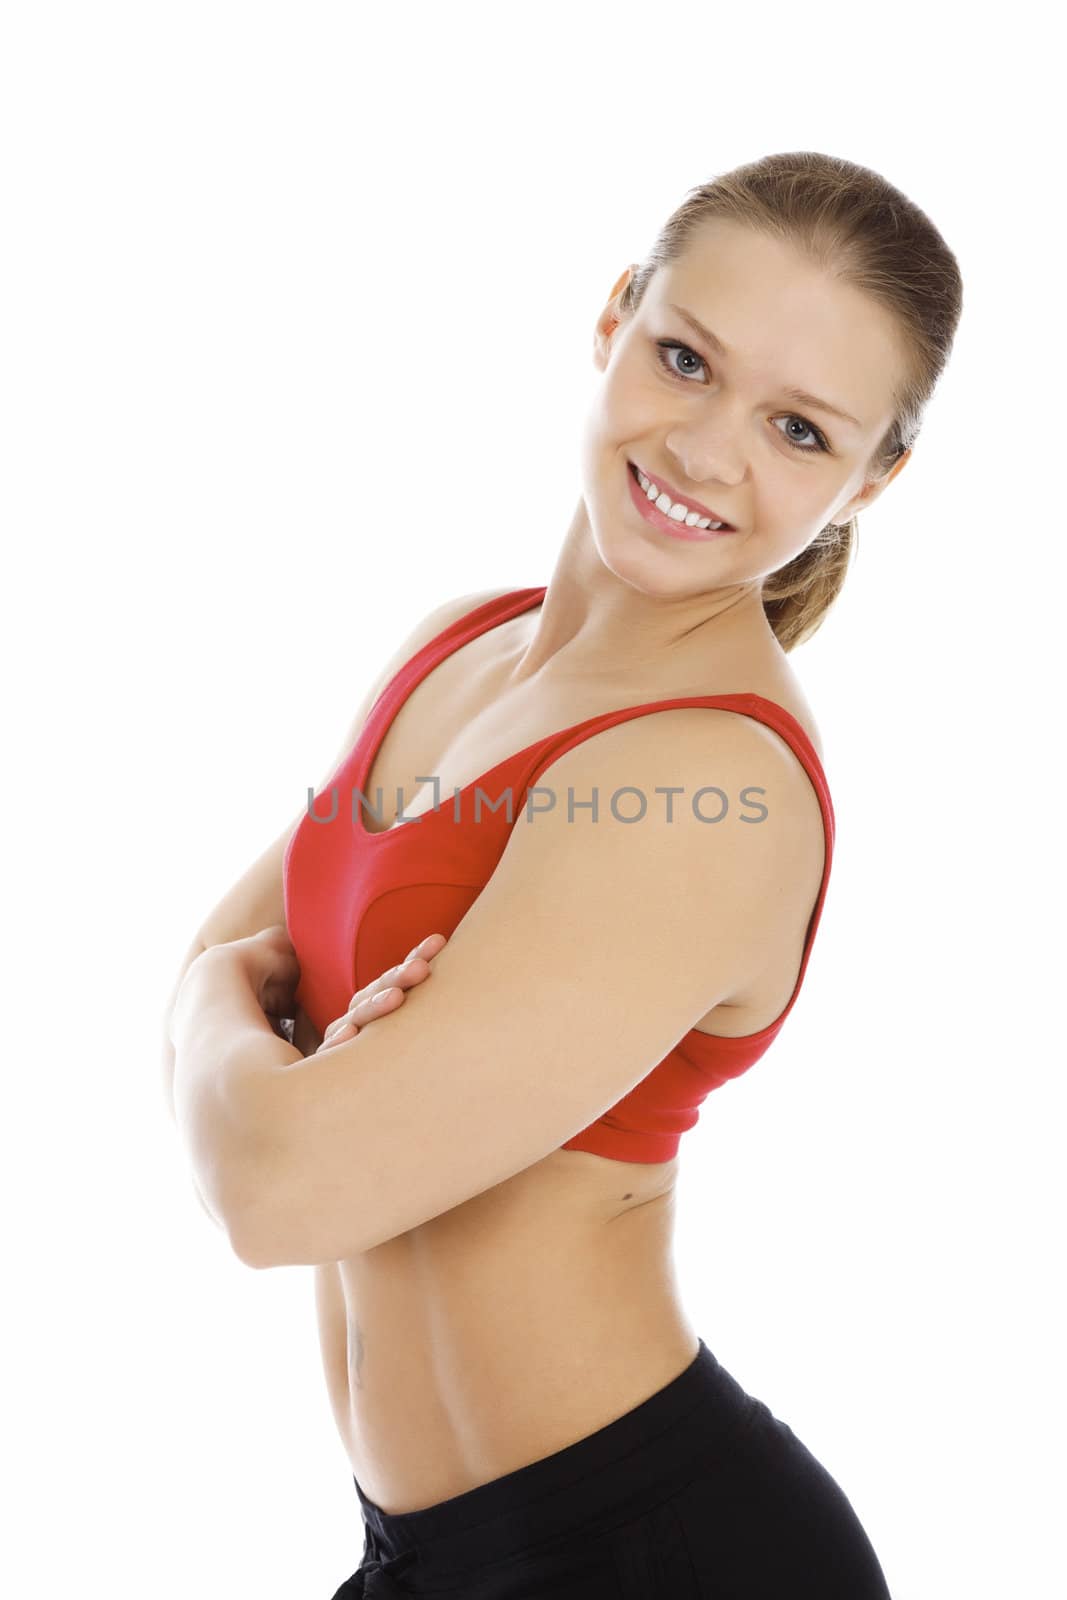 Smiling young sporty woman. Isolated over white background by Nobilior